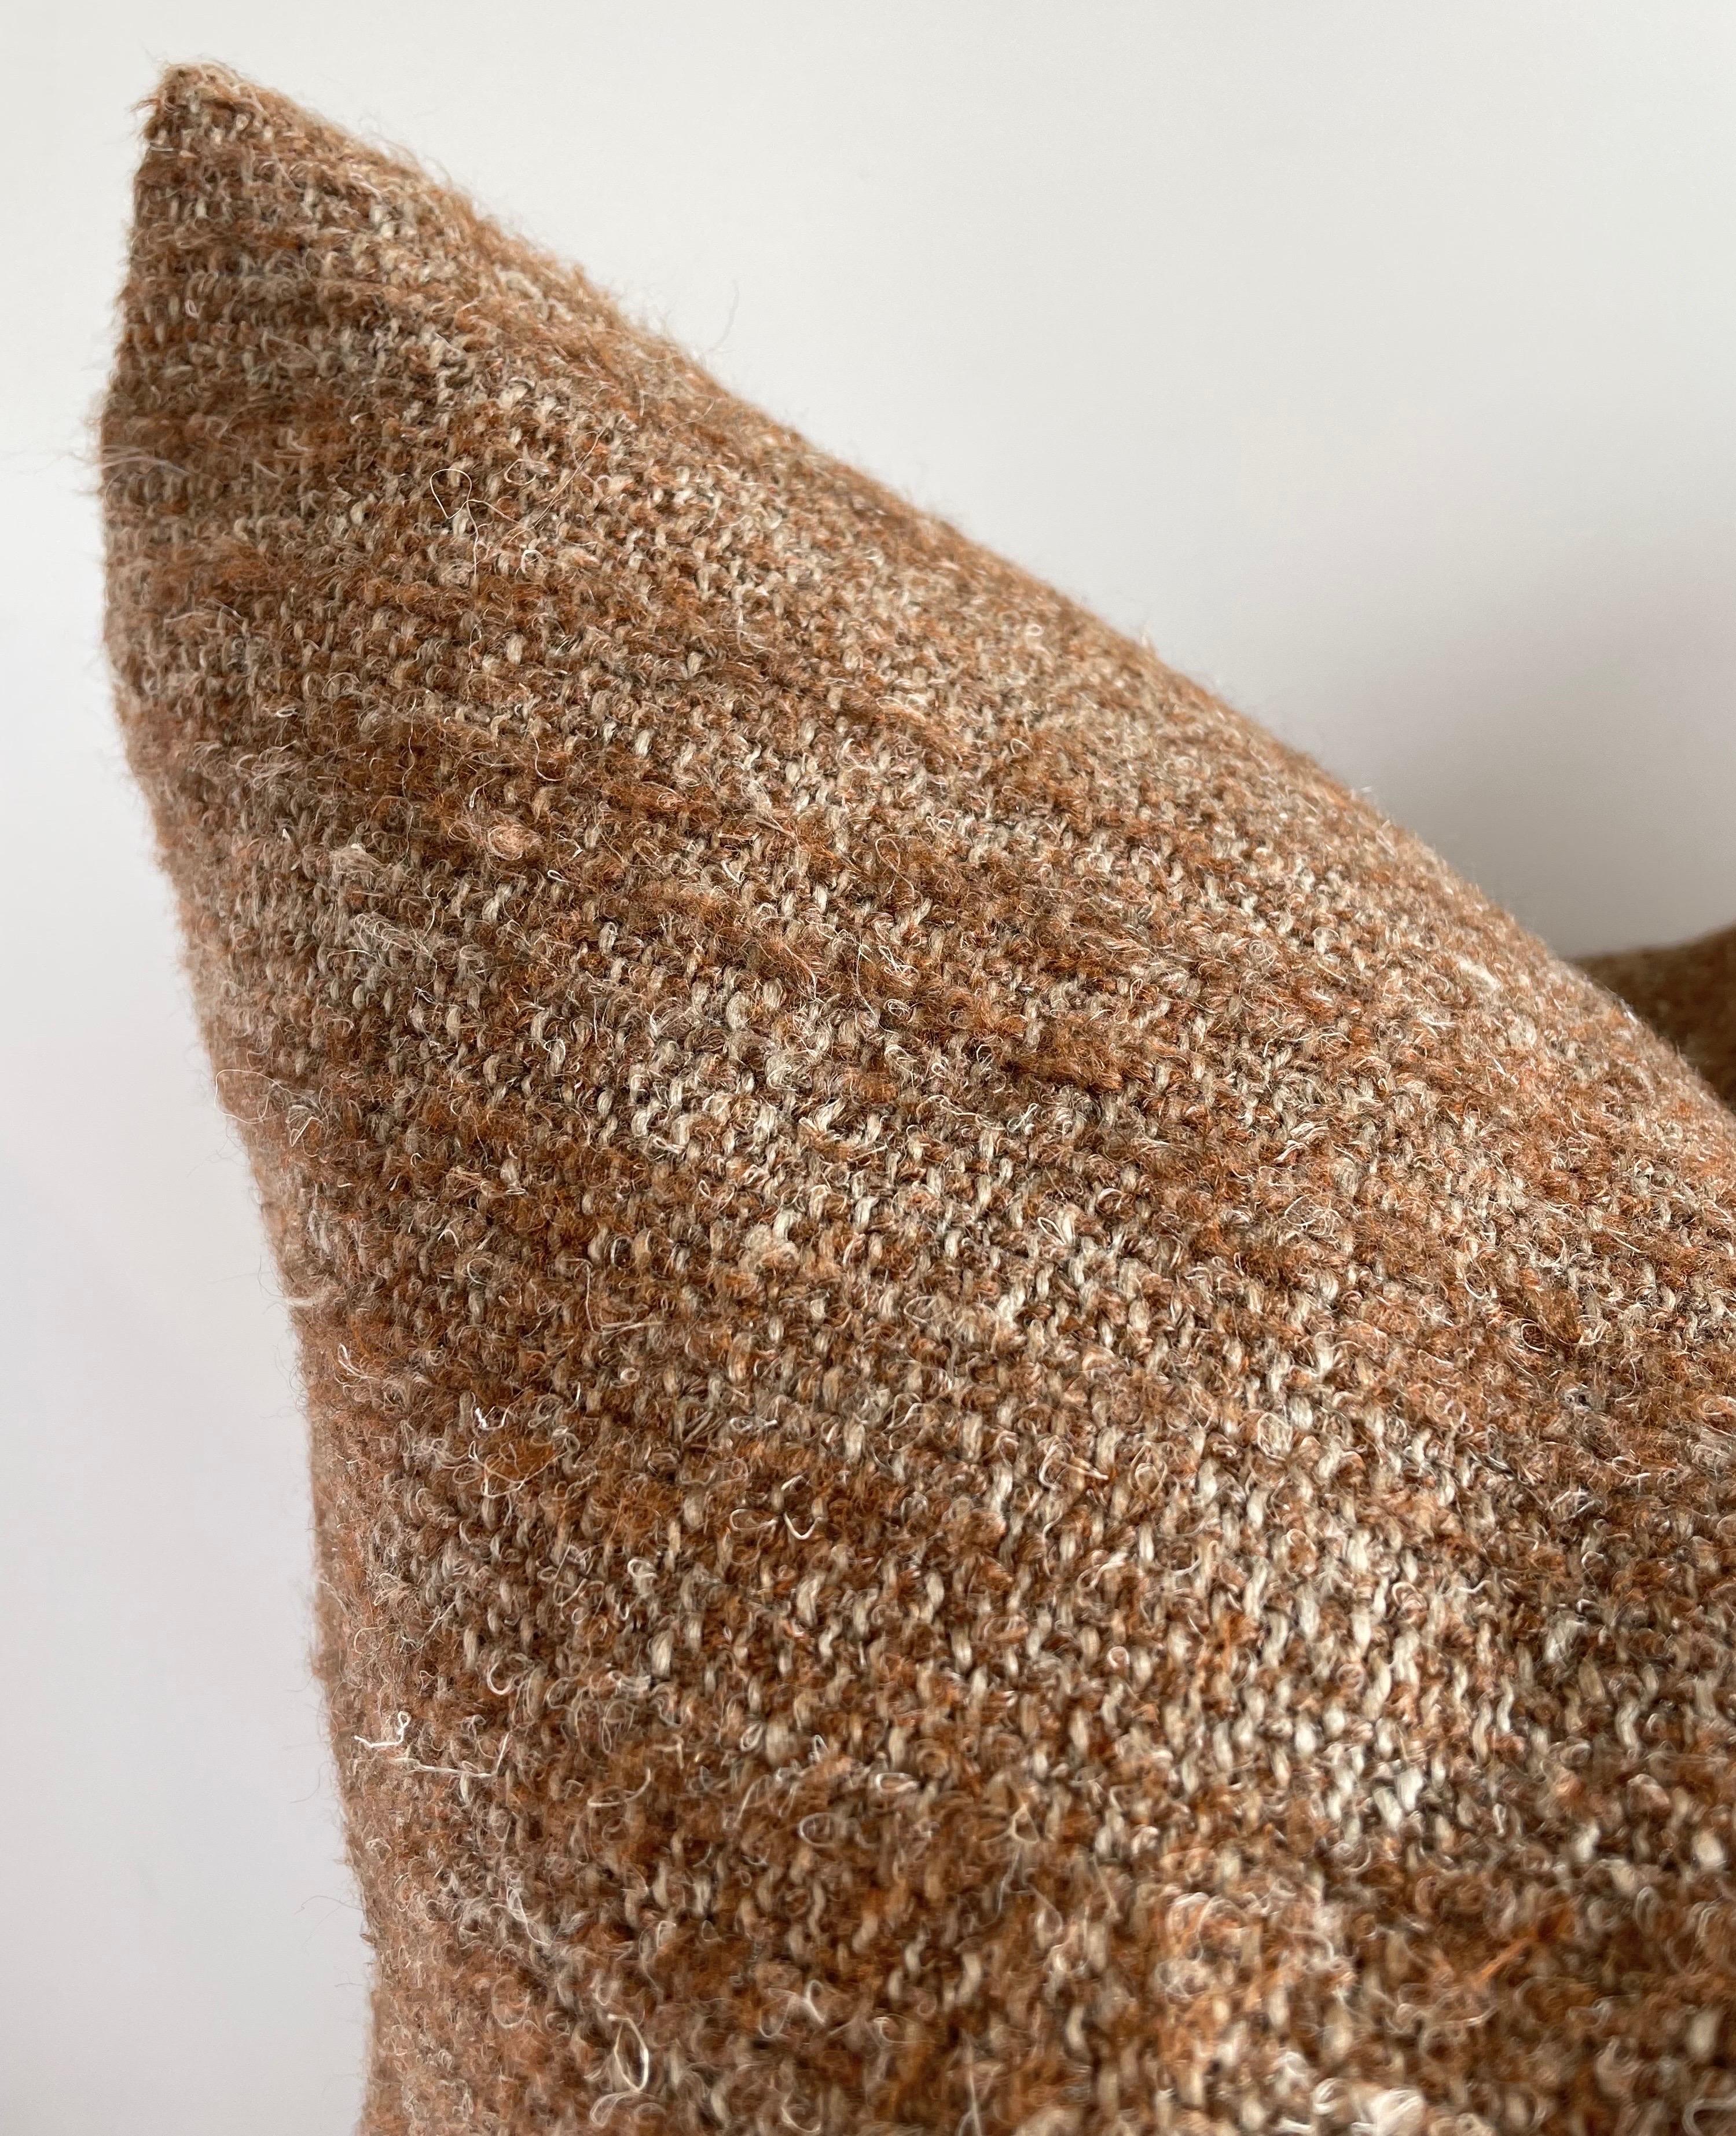 Woven in Belgium using traditional weaving techniques, Bloom Home Inc. Nasha features a Belgian Linen warp and alternating Belgian Linen/Mixed Fiber weft. Fringe details are limited editions made from our weaving salvage. 

Color: Brown
Content: